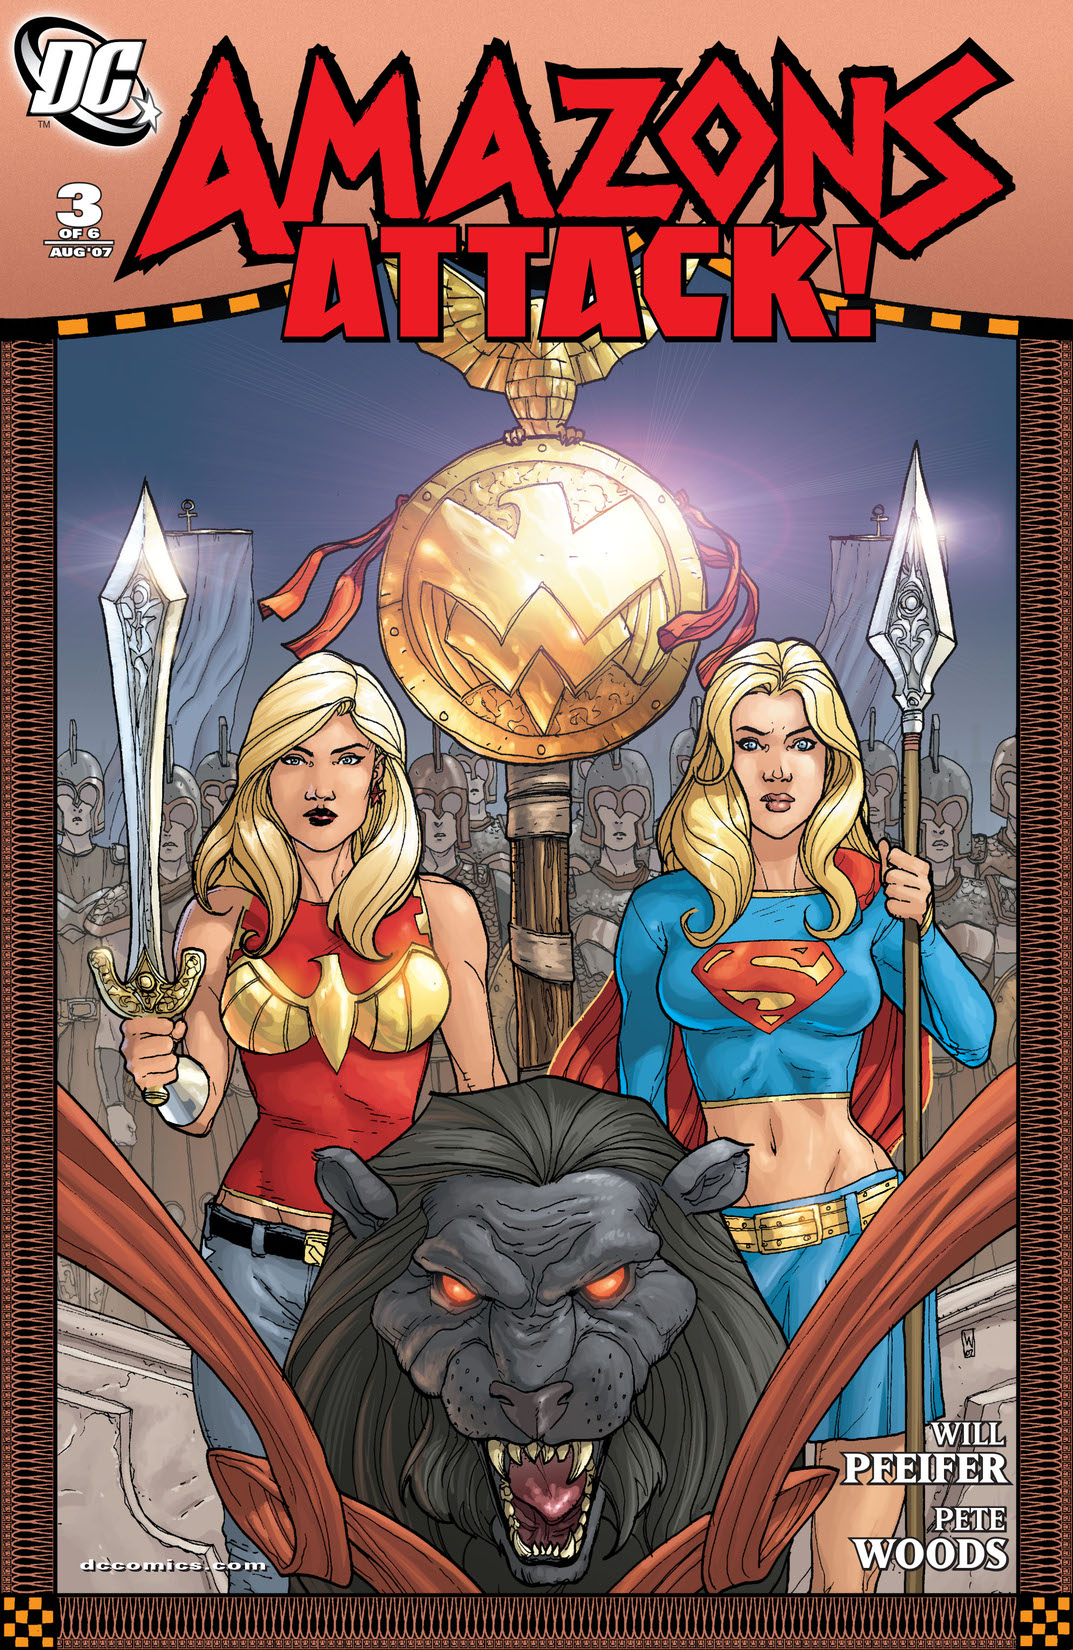 Amazons Attack #3 preview images